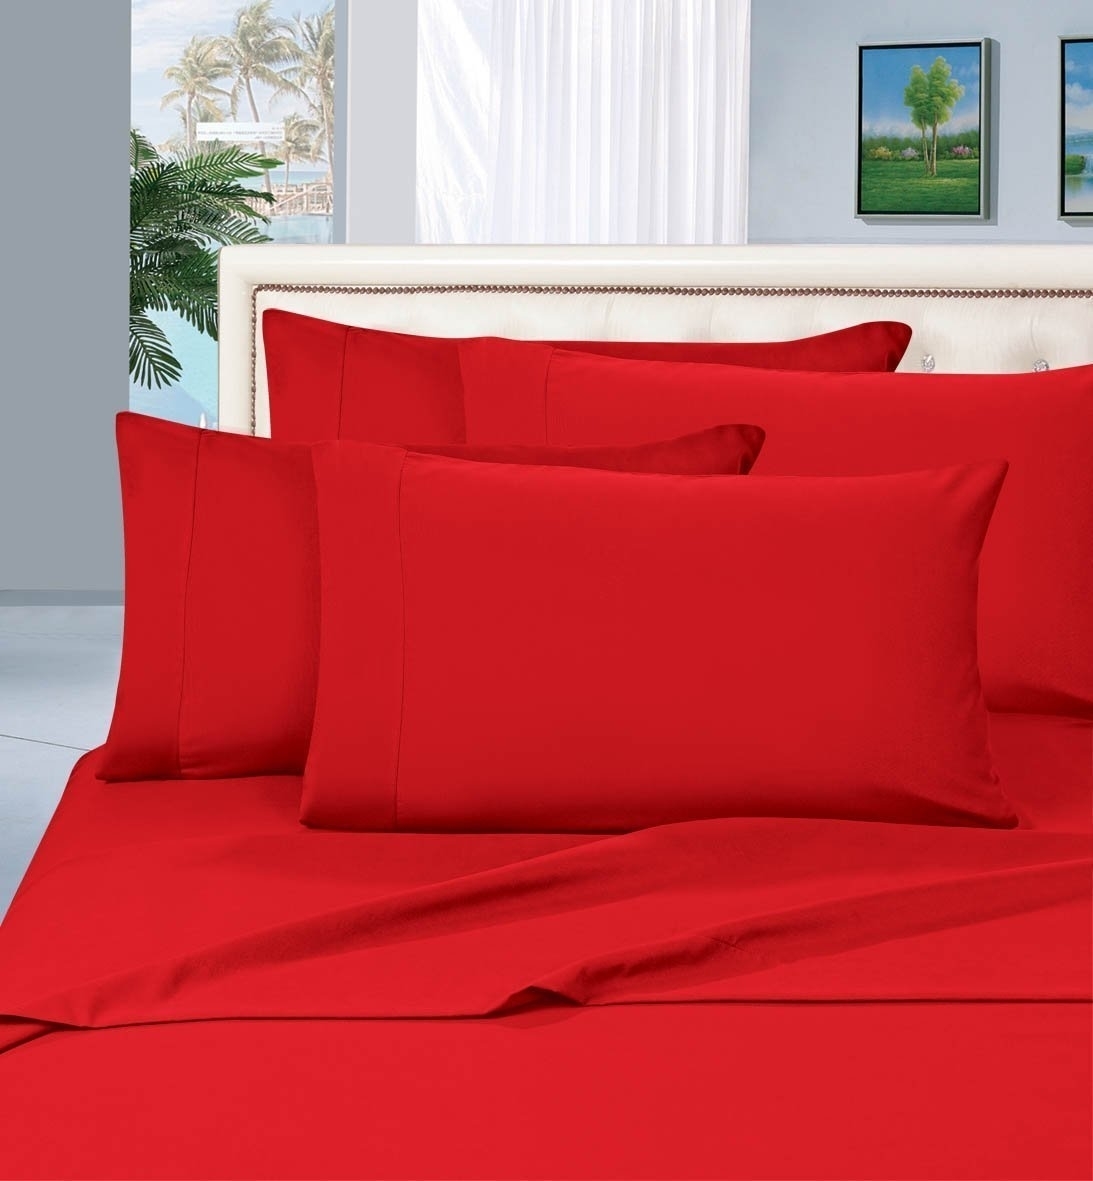 Elegant Comfort 1500 Series Wrinkle Resistant Egyptian Quality Hypoallergenic Ultra Soft Luxury 4-piece Bed Sheet Set, Full, Red